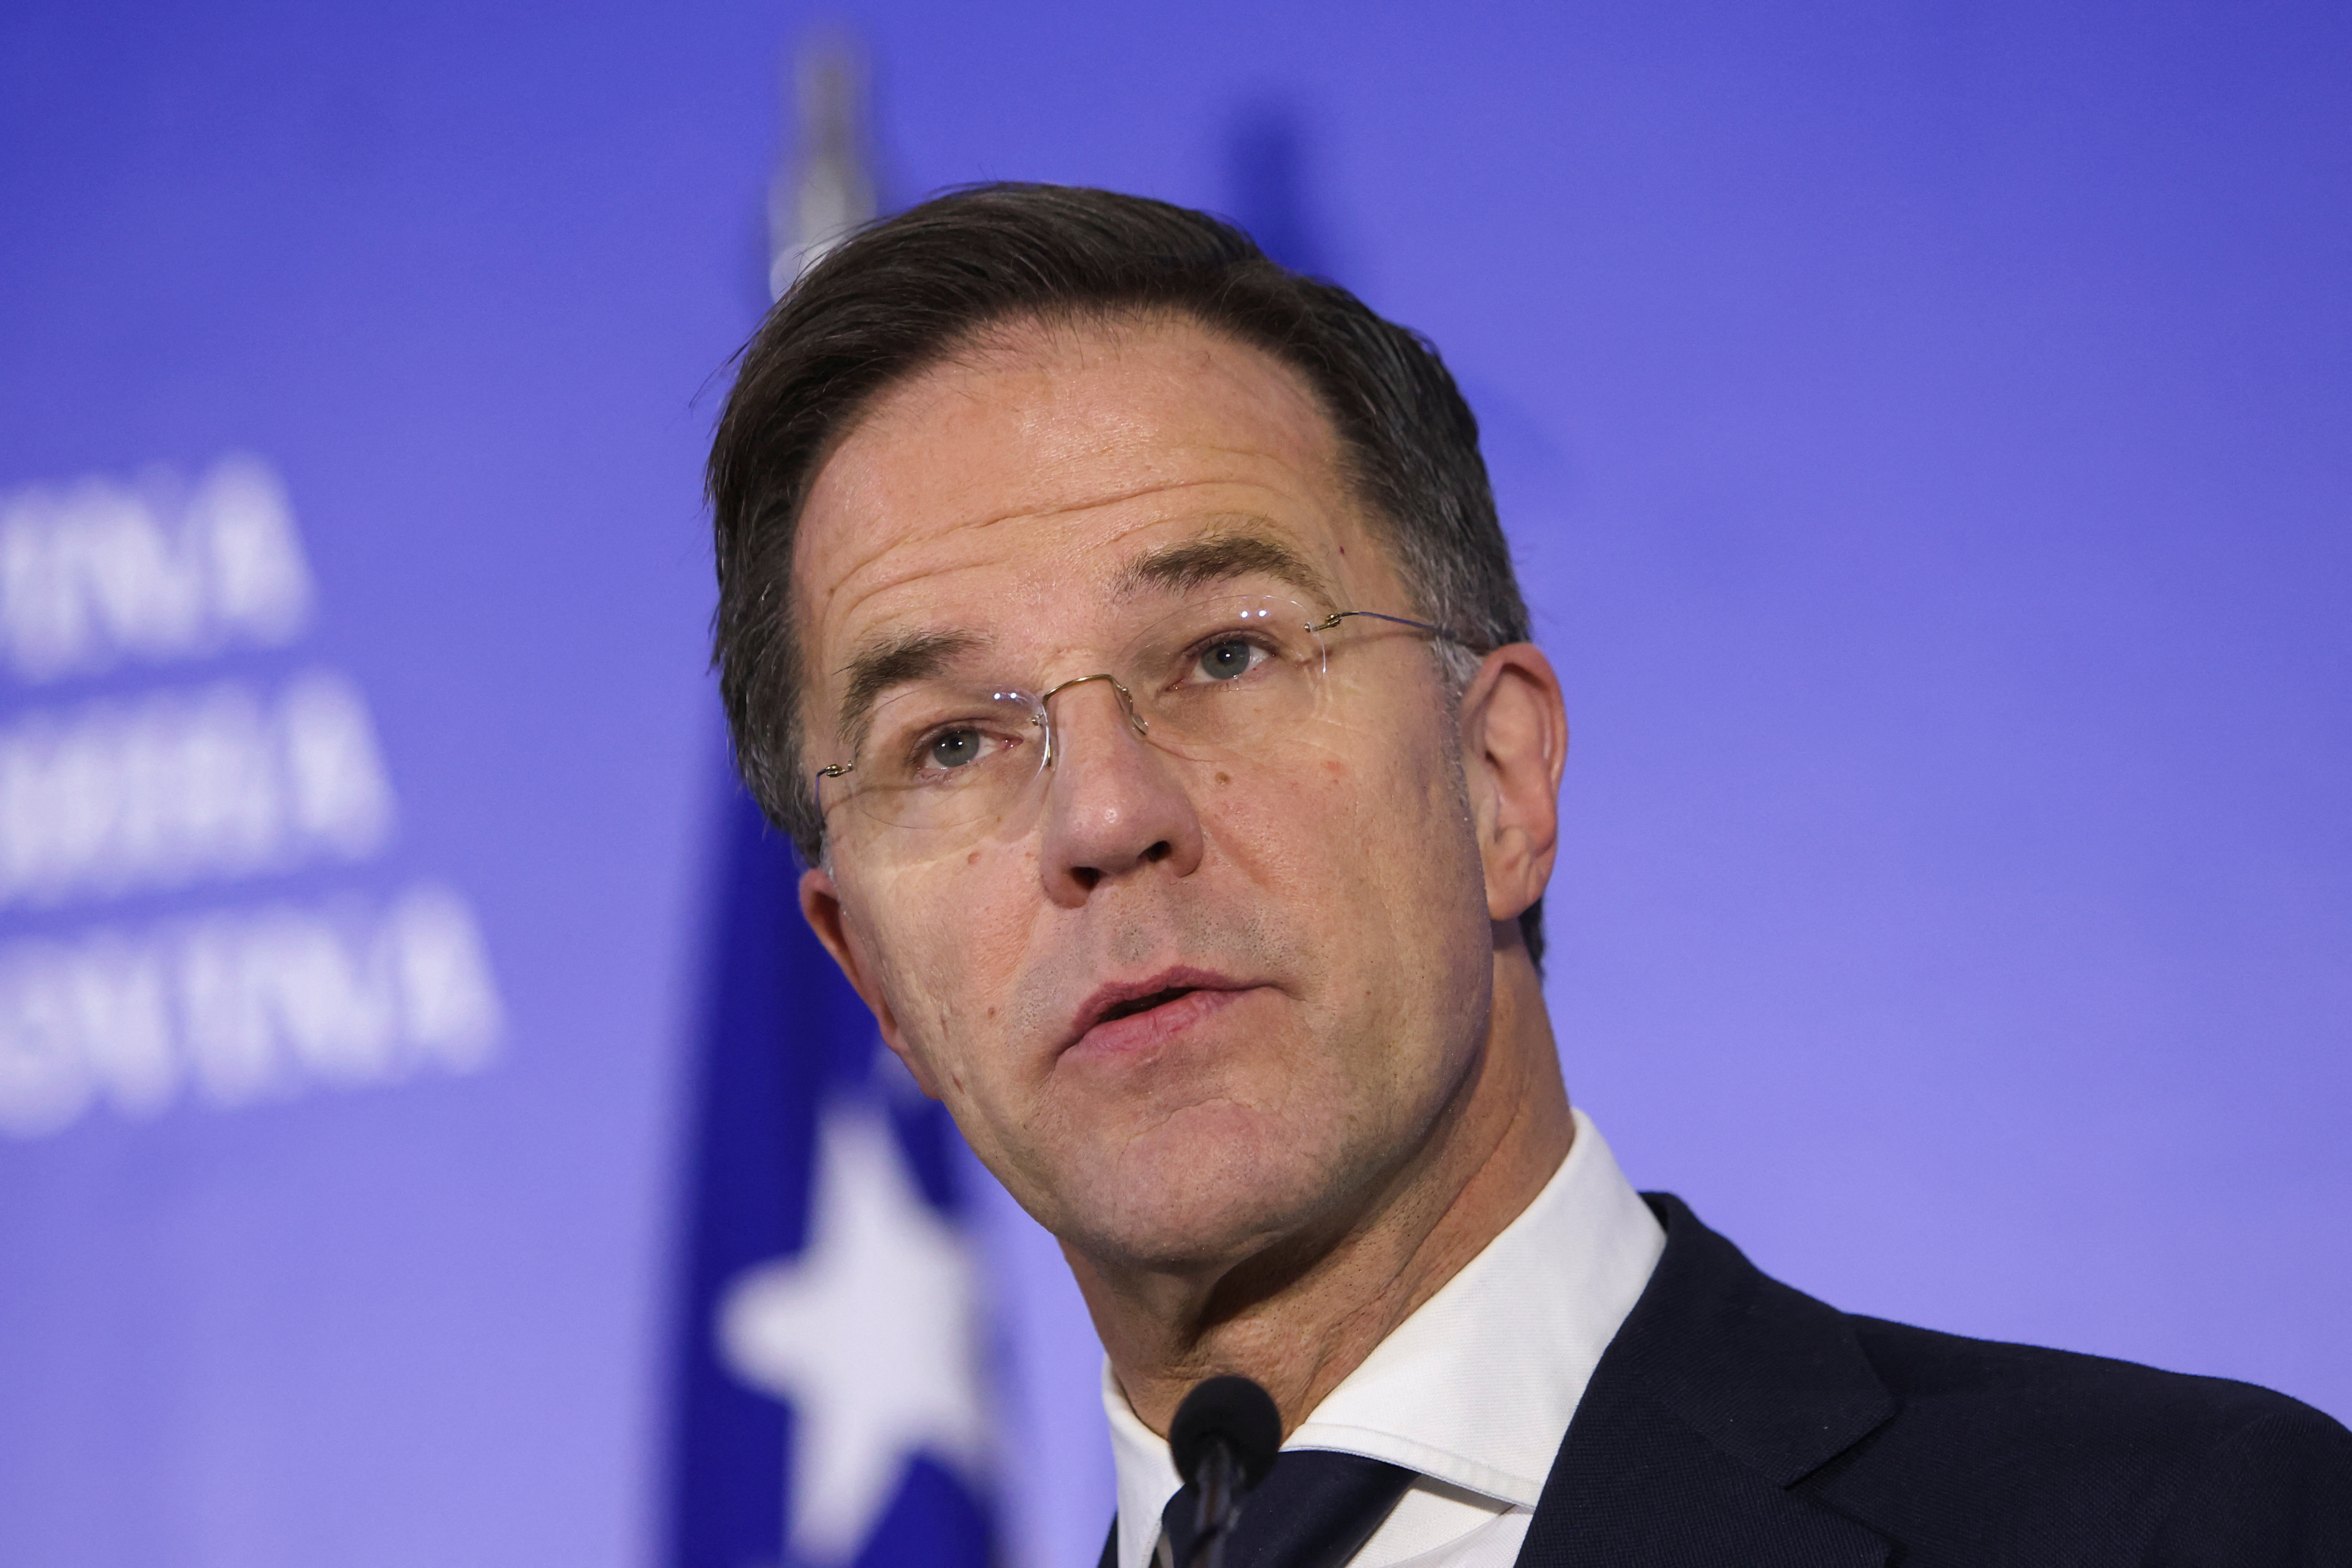 Dutch PM Rutte in strong position to lead NATO with US, UK, French and German backing | Reuters